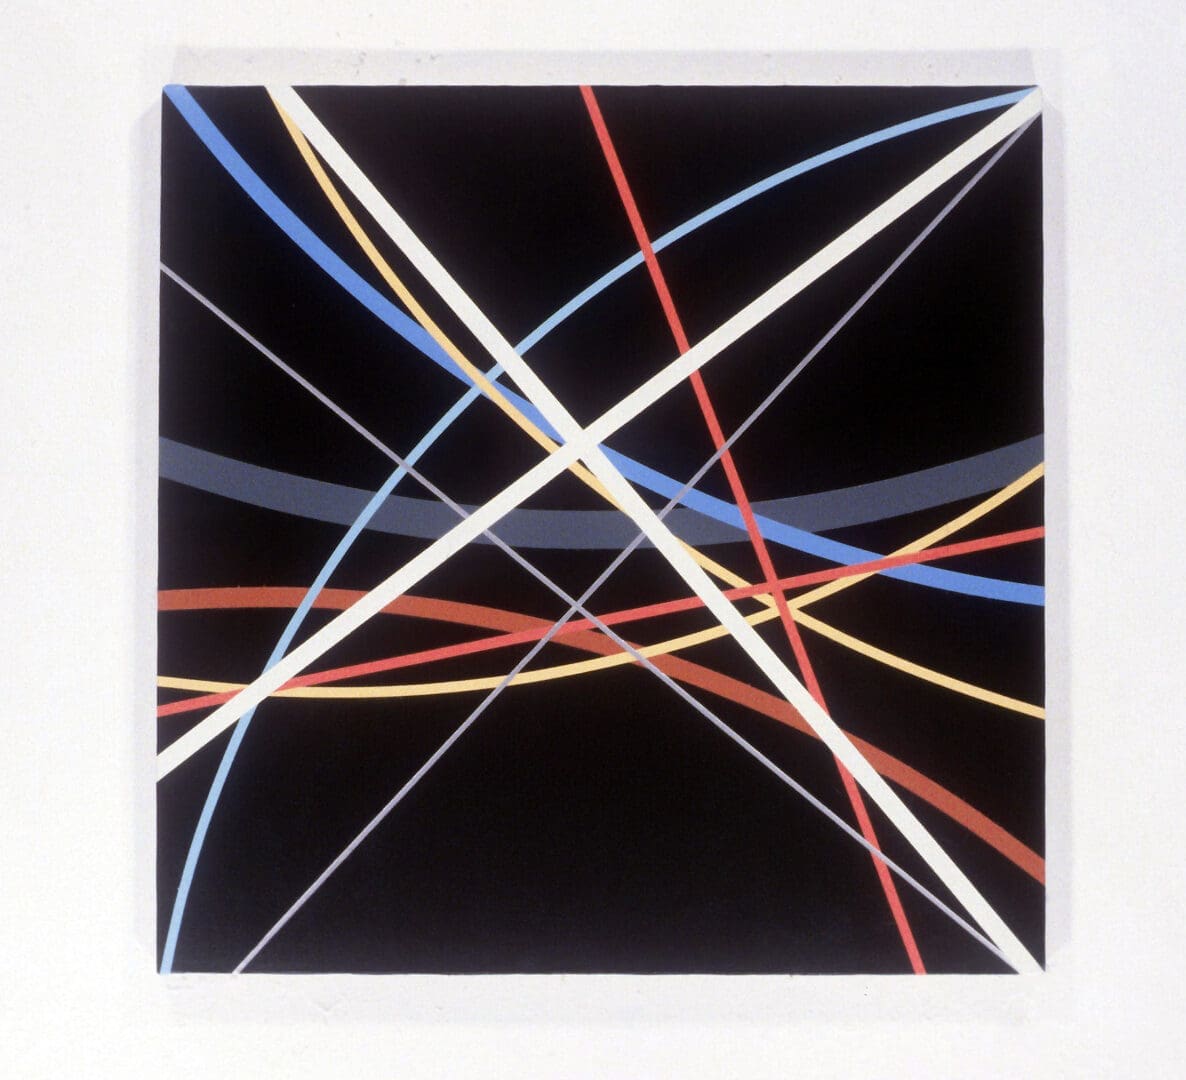 Clifford Singer. Untitled. 1984. Acrylic on Canvas. 50 x 50 inches